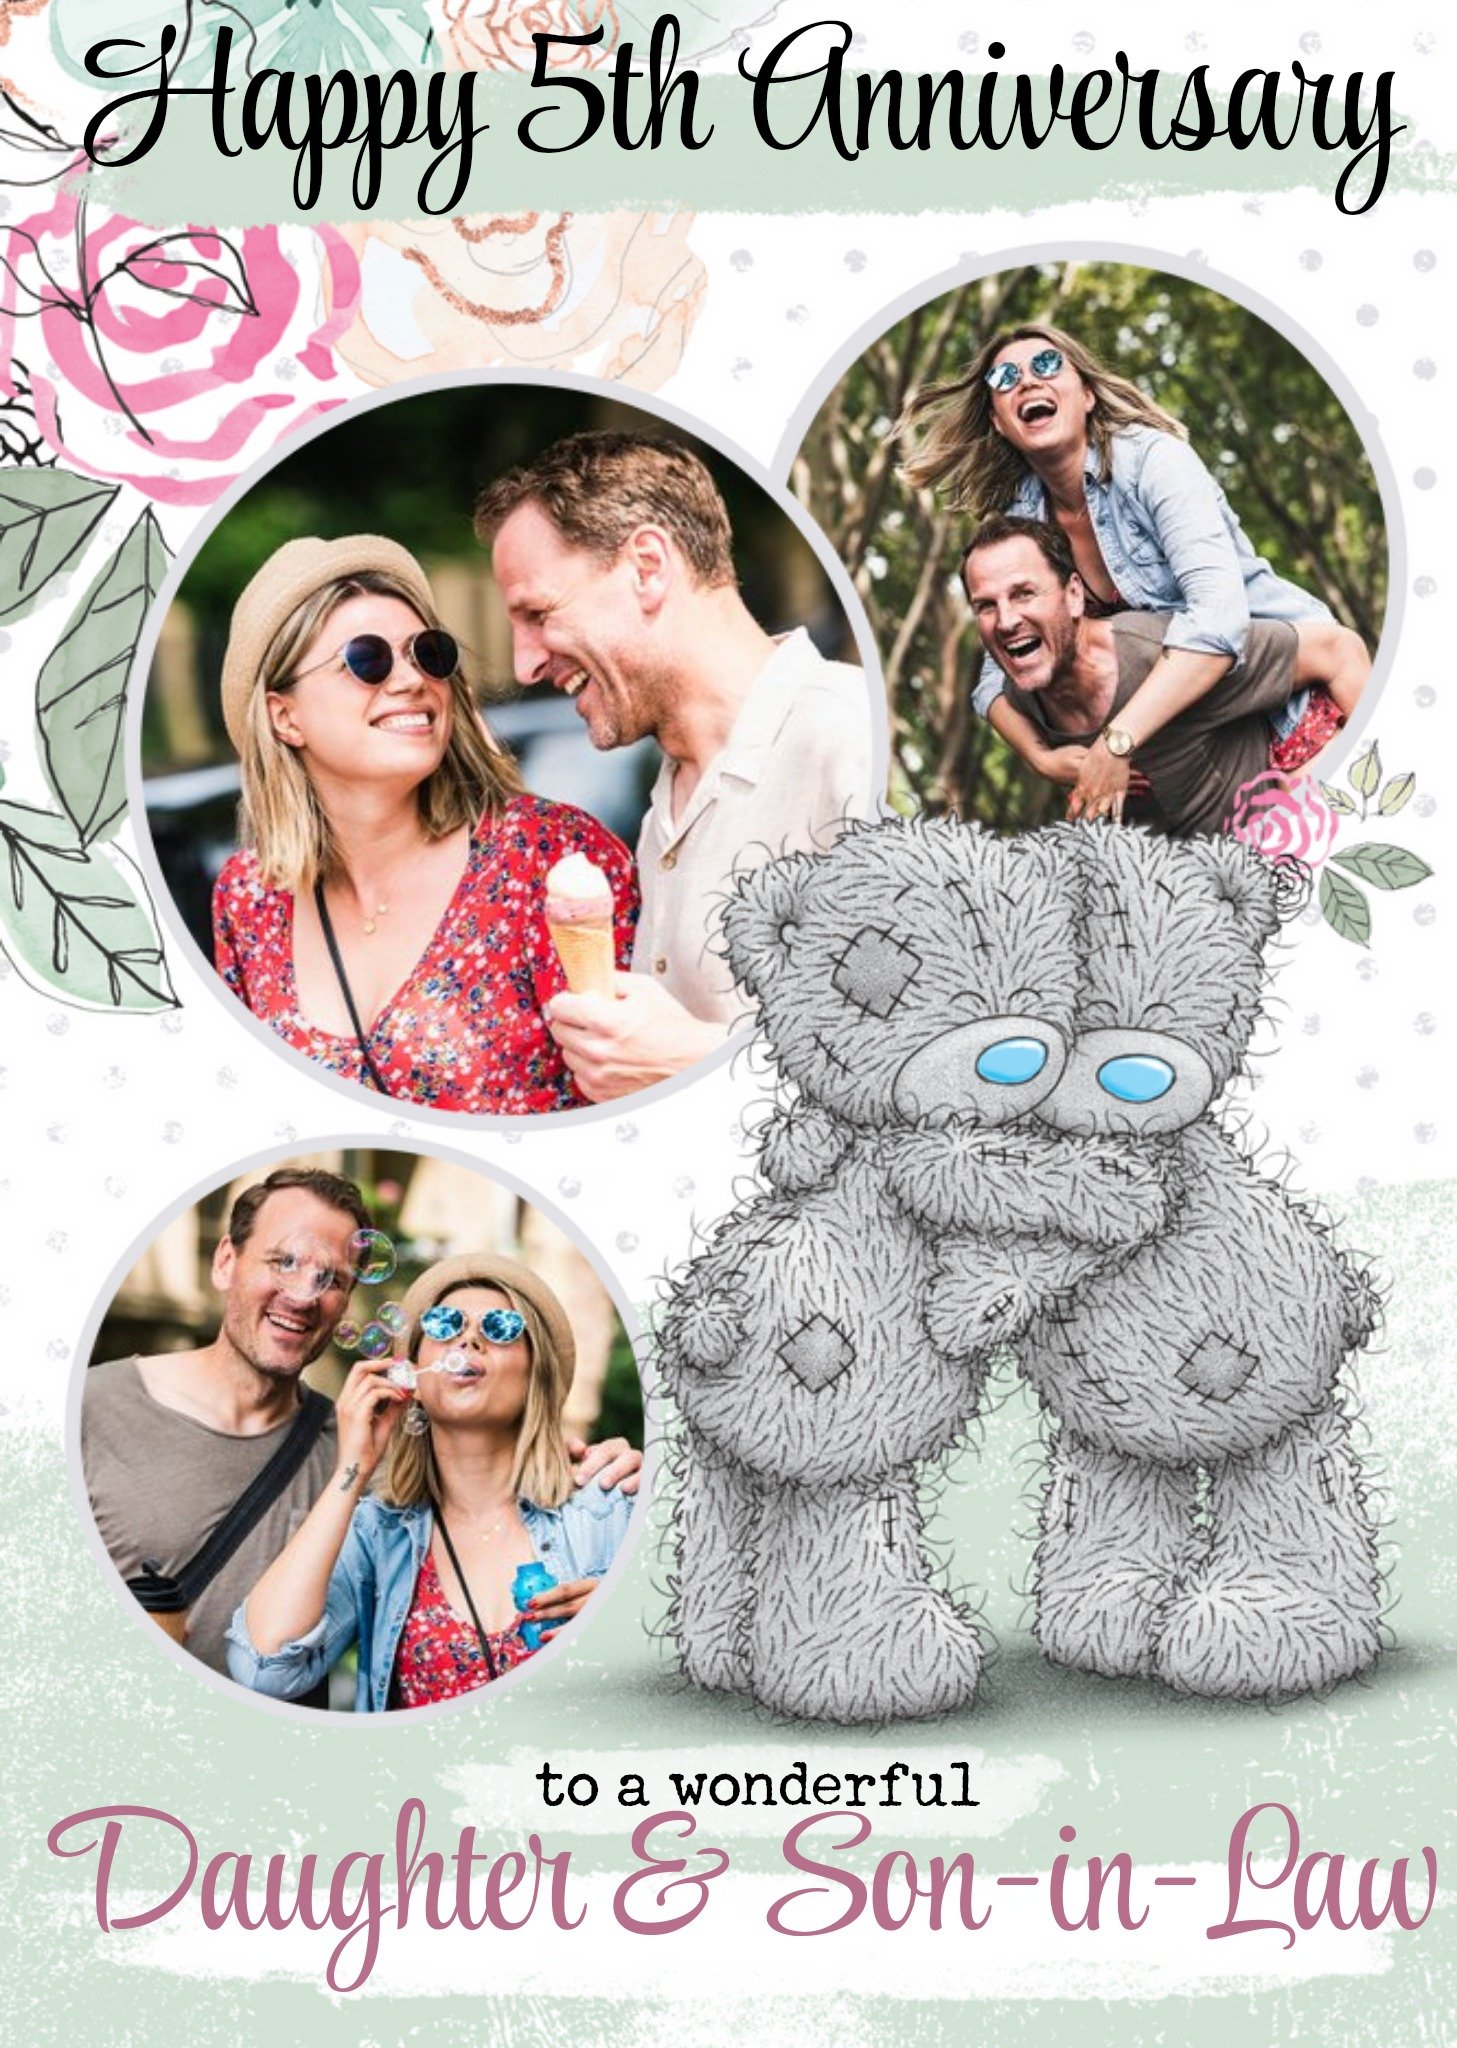 Me To You Tatty Teddy 5th Anniversary Photo Upload Card For Daughter And Son-In-Law Ecard